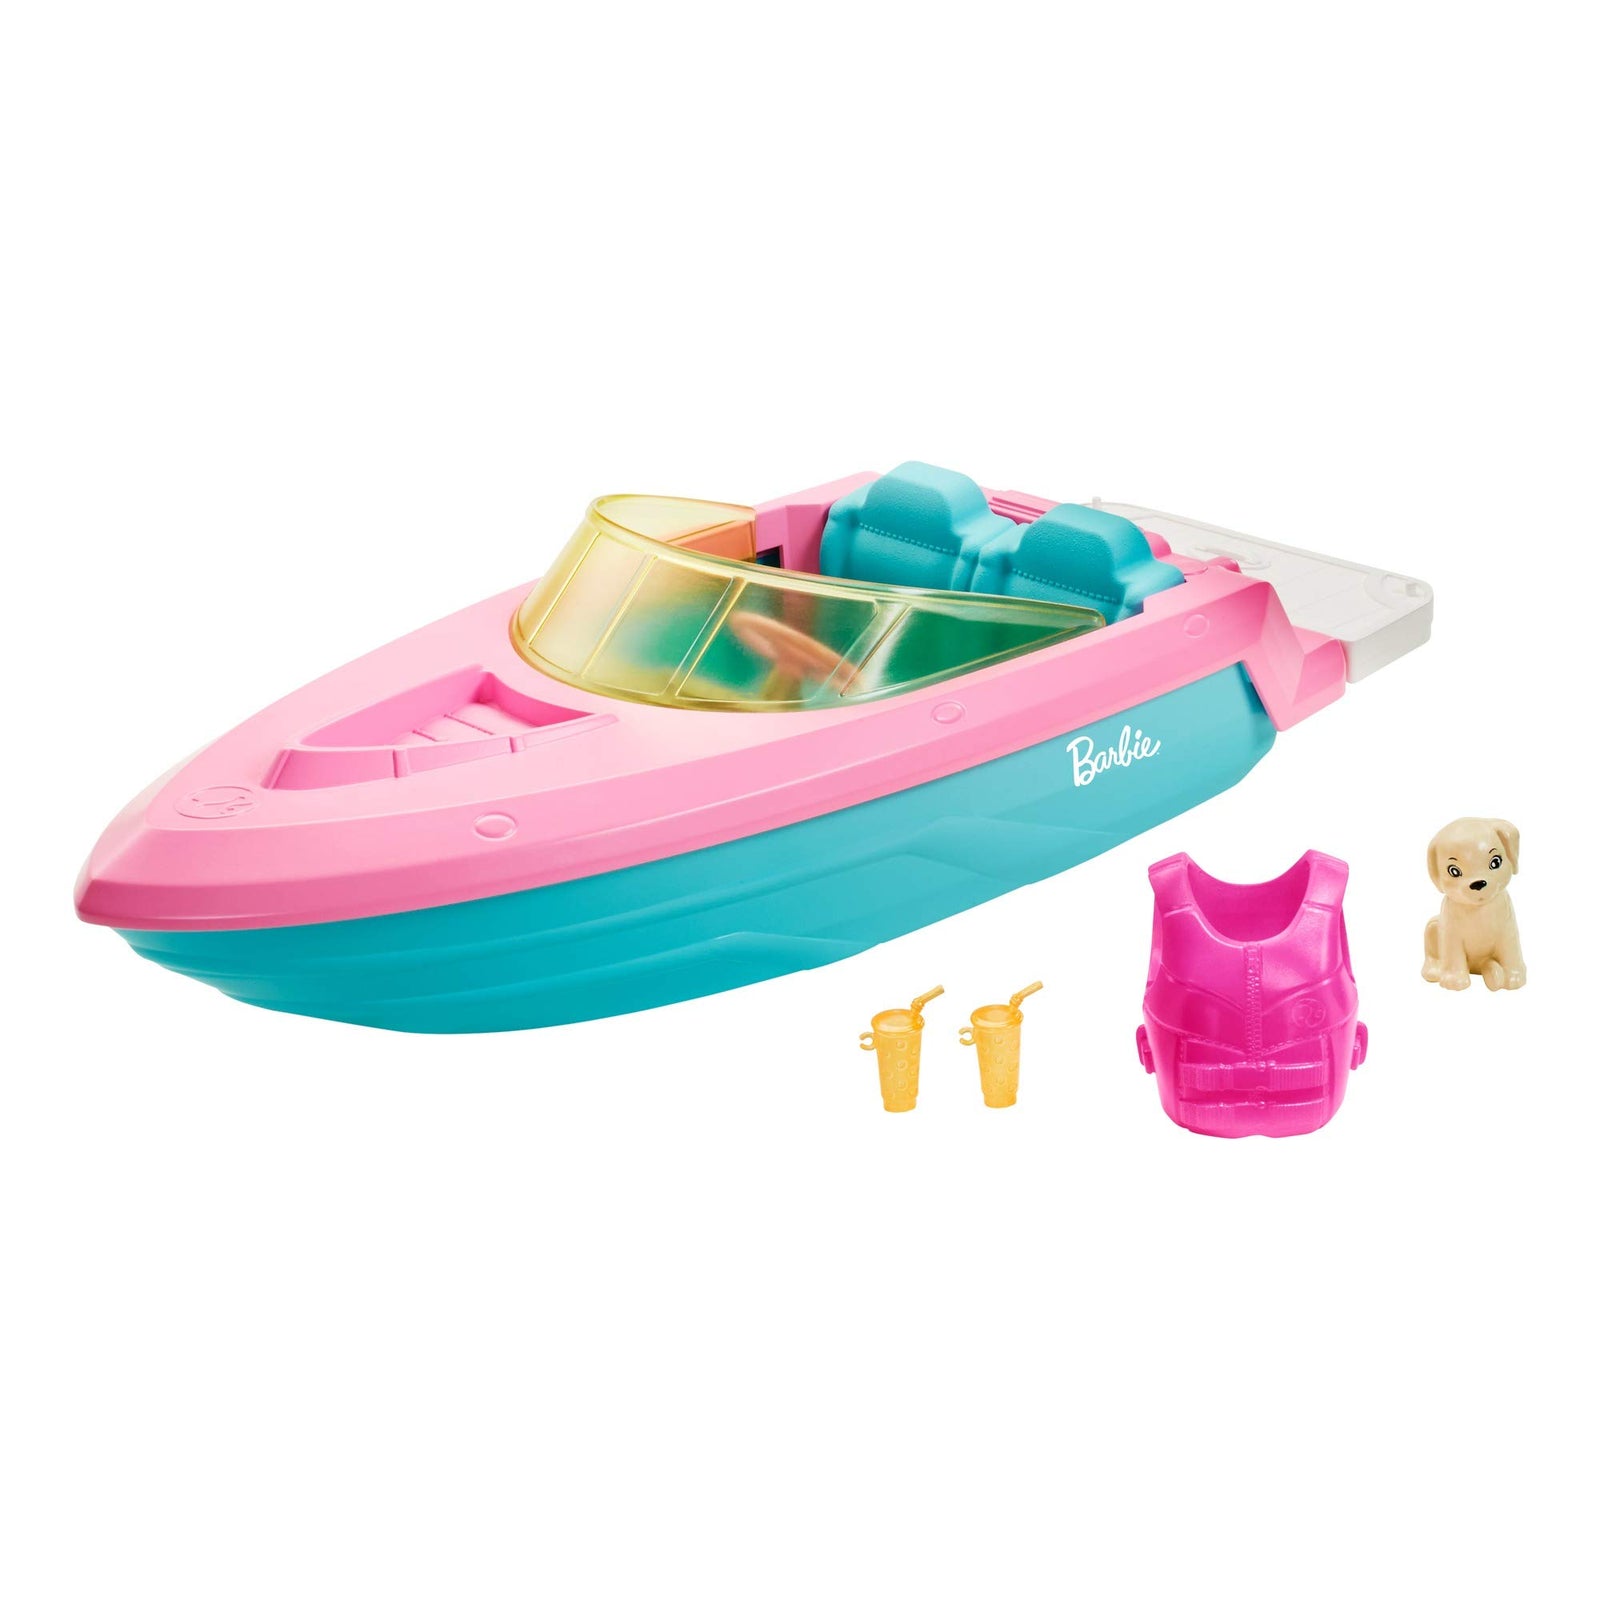 Barbie Boat with Puppy and Themed Accessories, Fits 3 Dolls, Floats in Water, Great Gift for 3 to 7 Year Olds